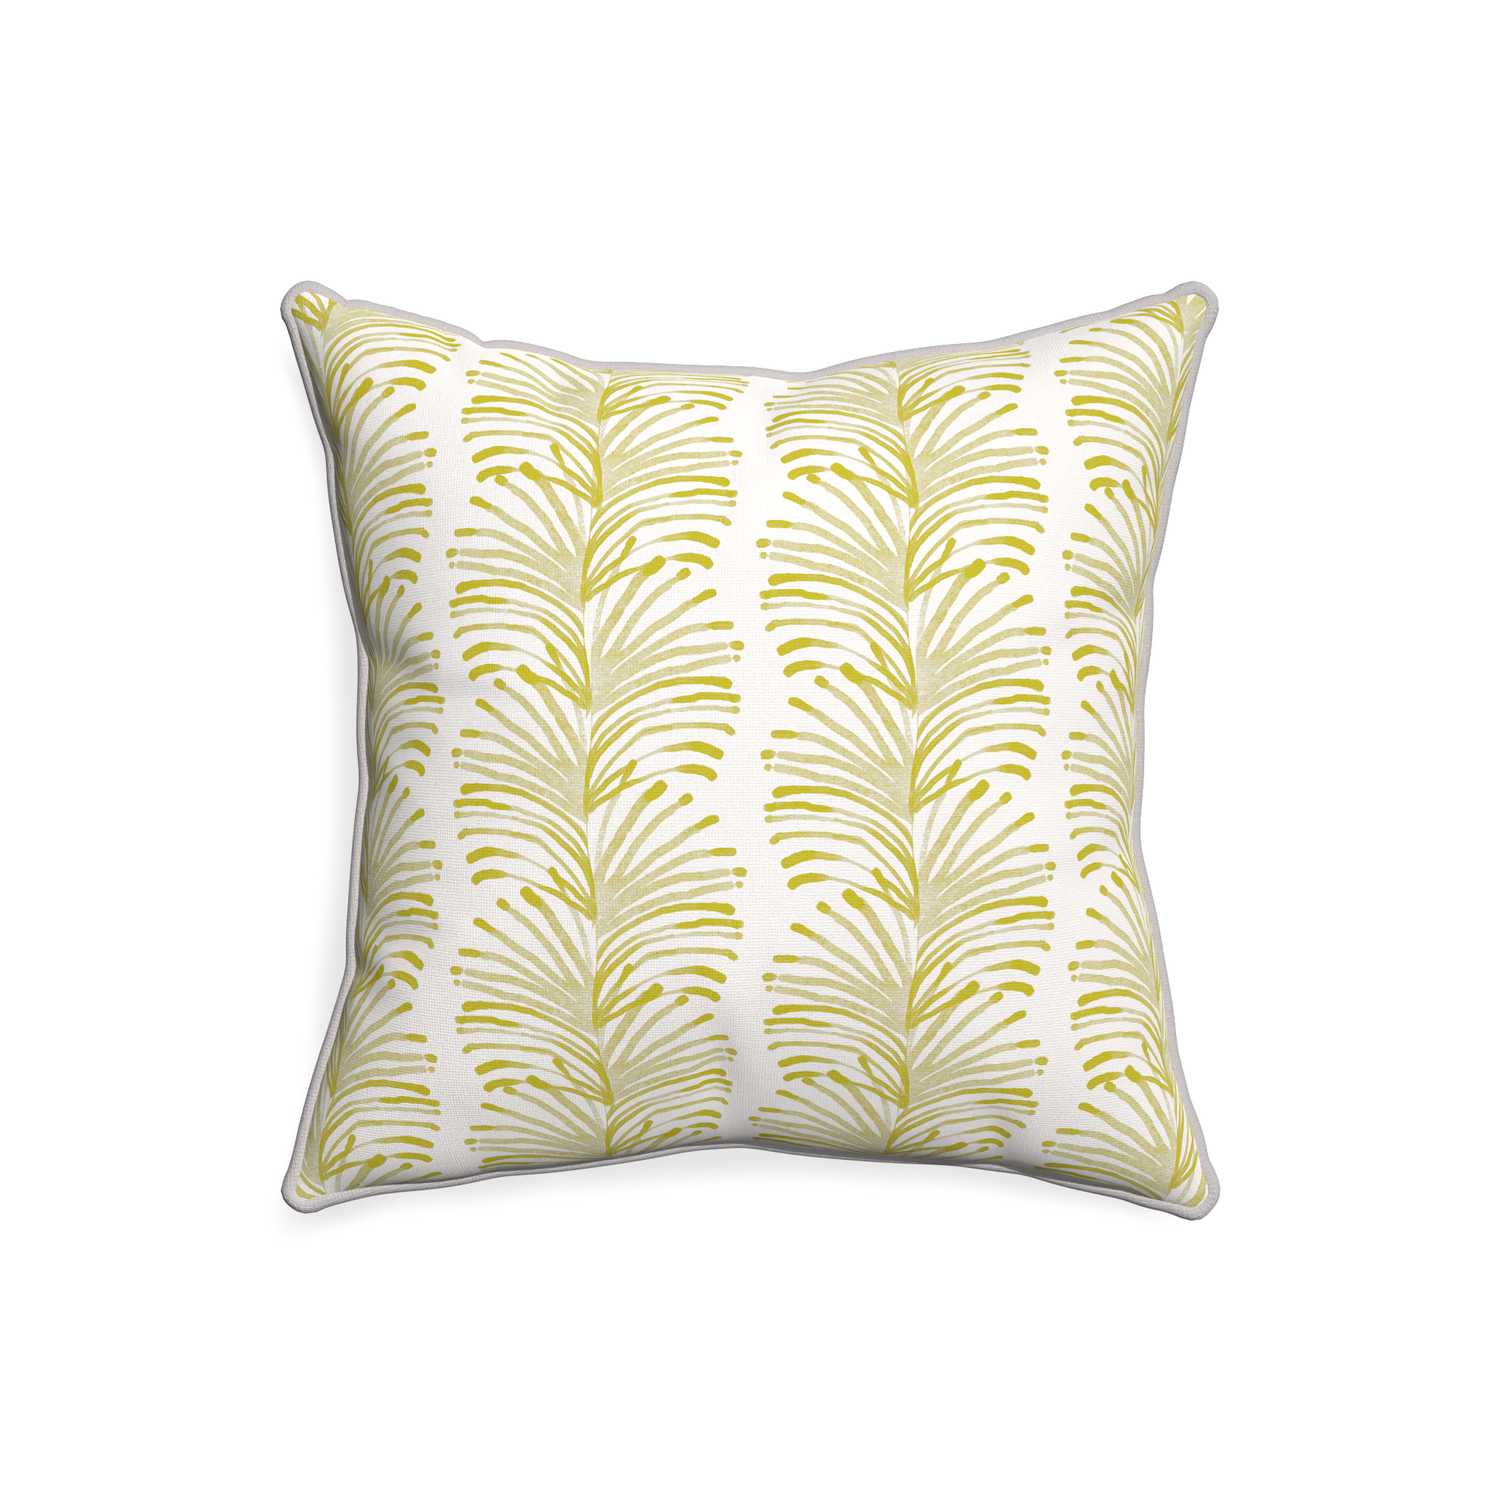 20-square emma chartreuse custom yellow stripe chartreusepillow with pebble piping on white background